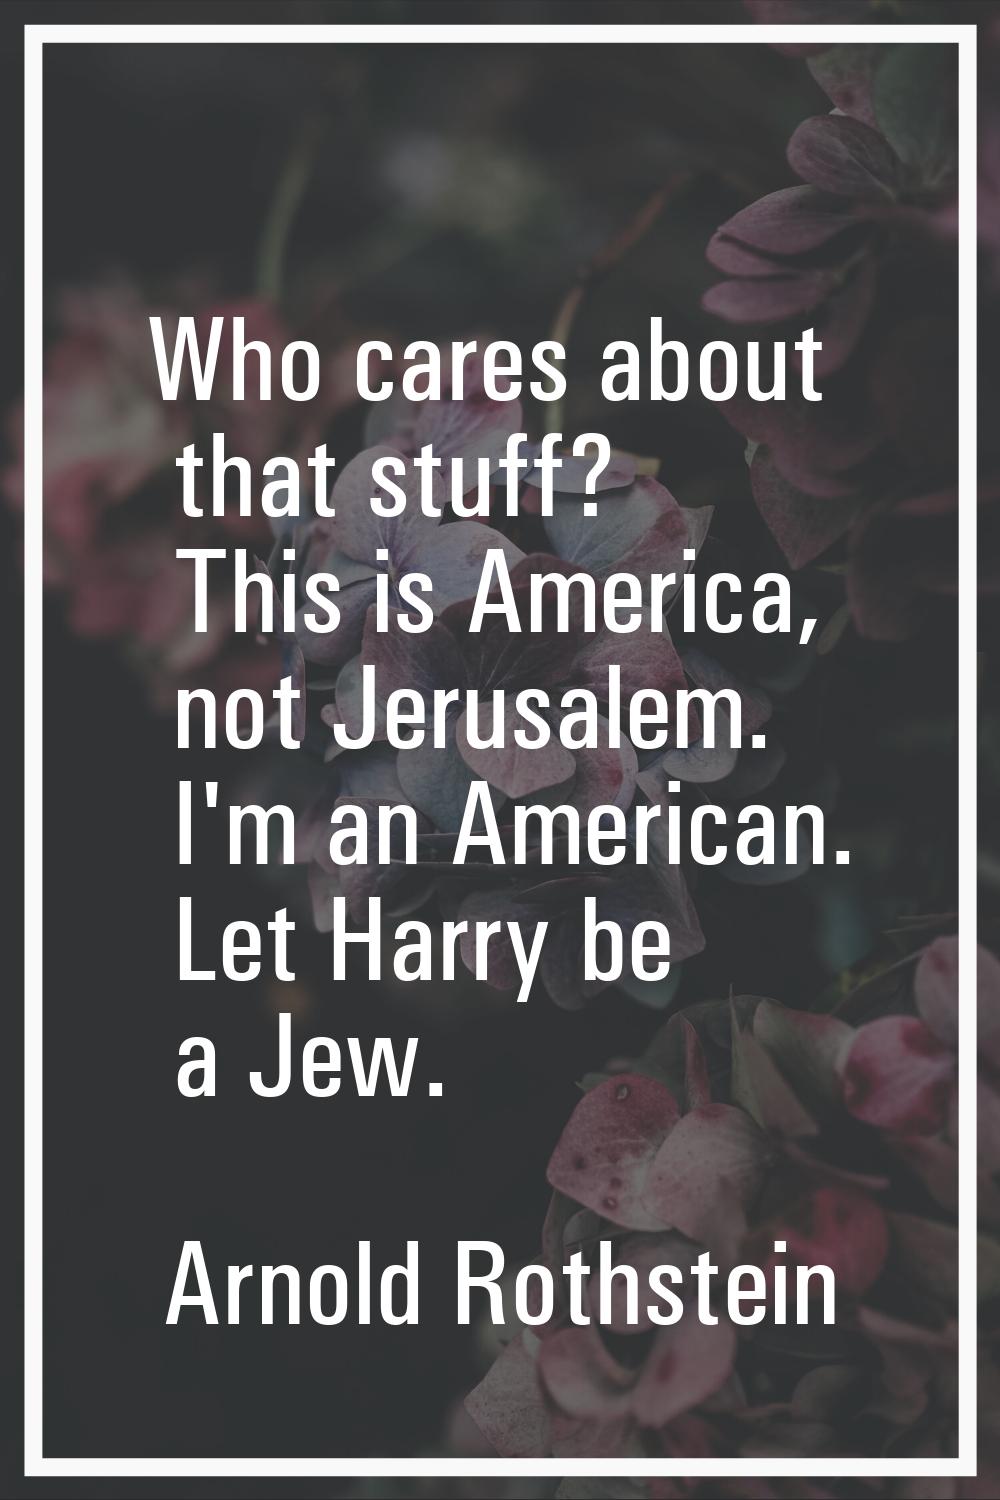 Who cares about that stuff? This is America, not Jerusalem. I'm an American. Let Harry be a Jew.